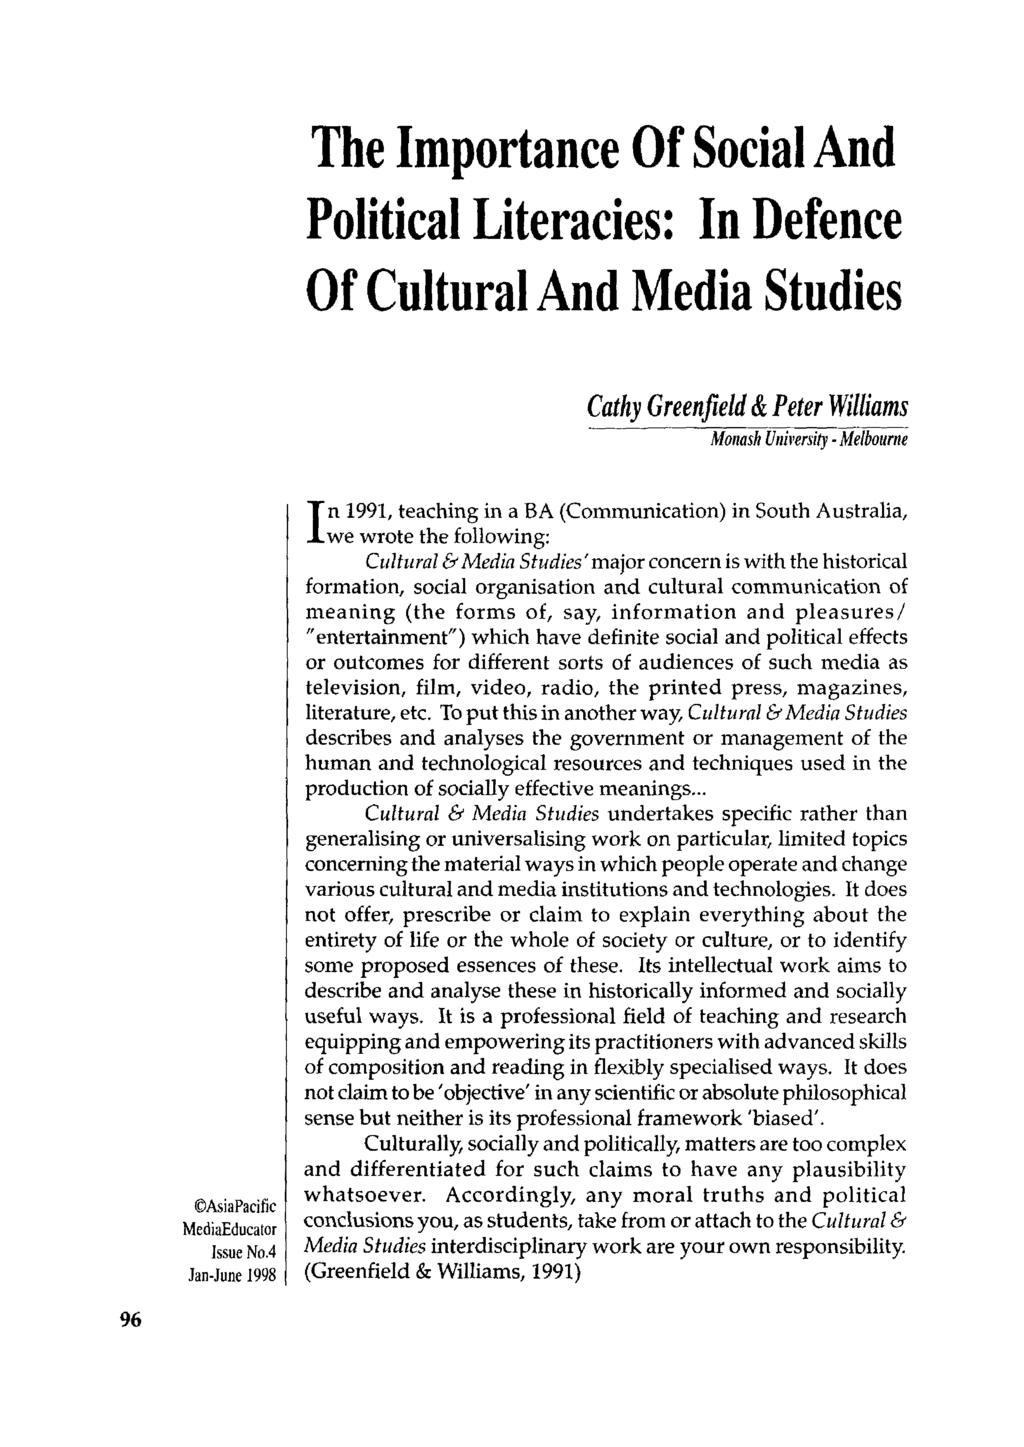 The Importance Of Social And Political Literacies: In Defence Of Cultural And Media Studies Cathy Greenfield &Peter Williams MOl/ash UI/imsity. Melbourne AsiaPacific MediaEducator Issue No.